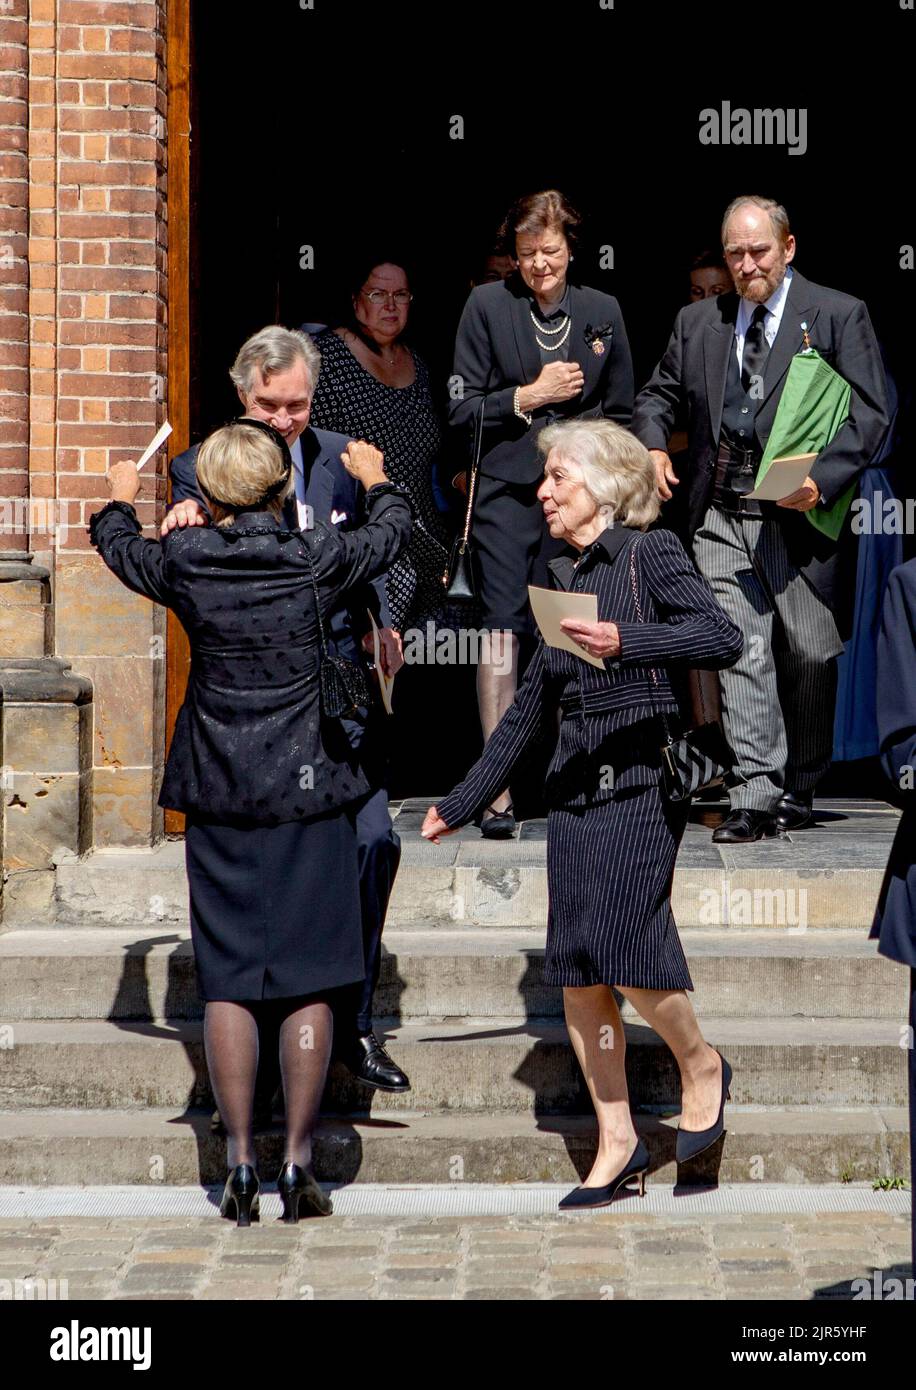 Archduke Rudolph of Austria and Baroness Marie Hélène de Villenfagne de Vogelsanck, Archduchess Marie Astrid of Austria, Prince Guillaume of Luxembourg and Archduchess Anna-Gabriele of Austria leave at the l eglise Saint-Pierre in Belil, on August 22, 2022, after attended the funeral of Prince Wauthier de Ligne (10-07-1952/15-08-2022), he was the First Cousin of the Grand Duke of Luxembourg Photo: Albert Nieboer/Netherlands OUT/Point de Vue OUT Stock Photo